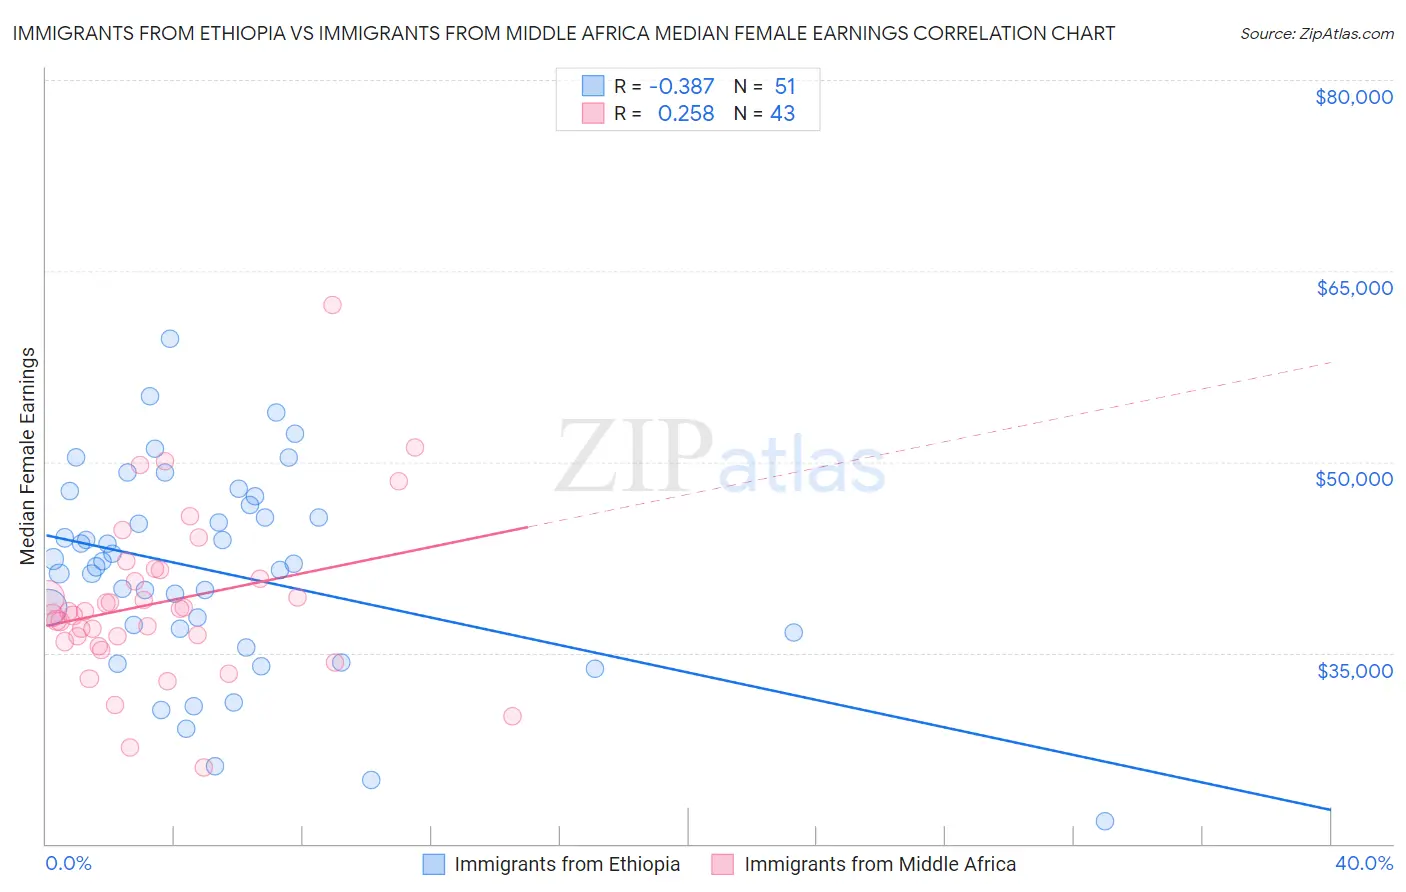 Immigrants from Ethiopia vs Immigrants from Middle Africa Median Female Earnings